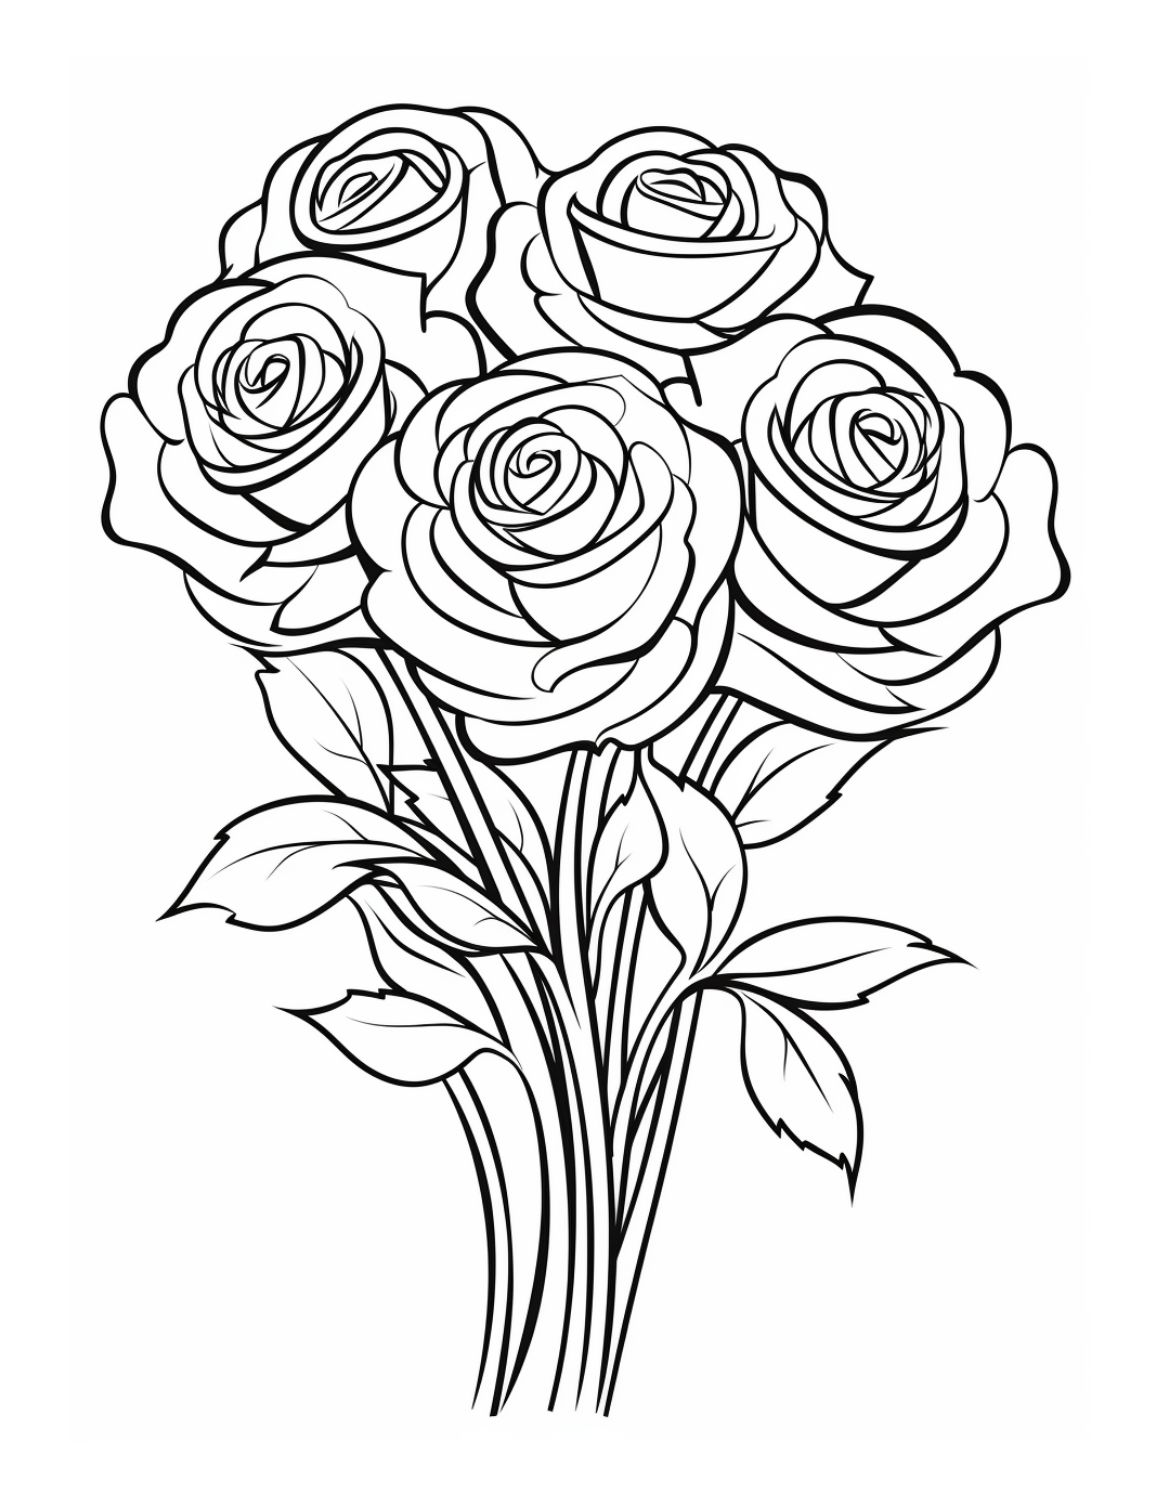 Free rose coloring pages for kids and adults to enjoy skip to my lou